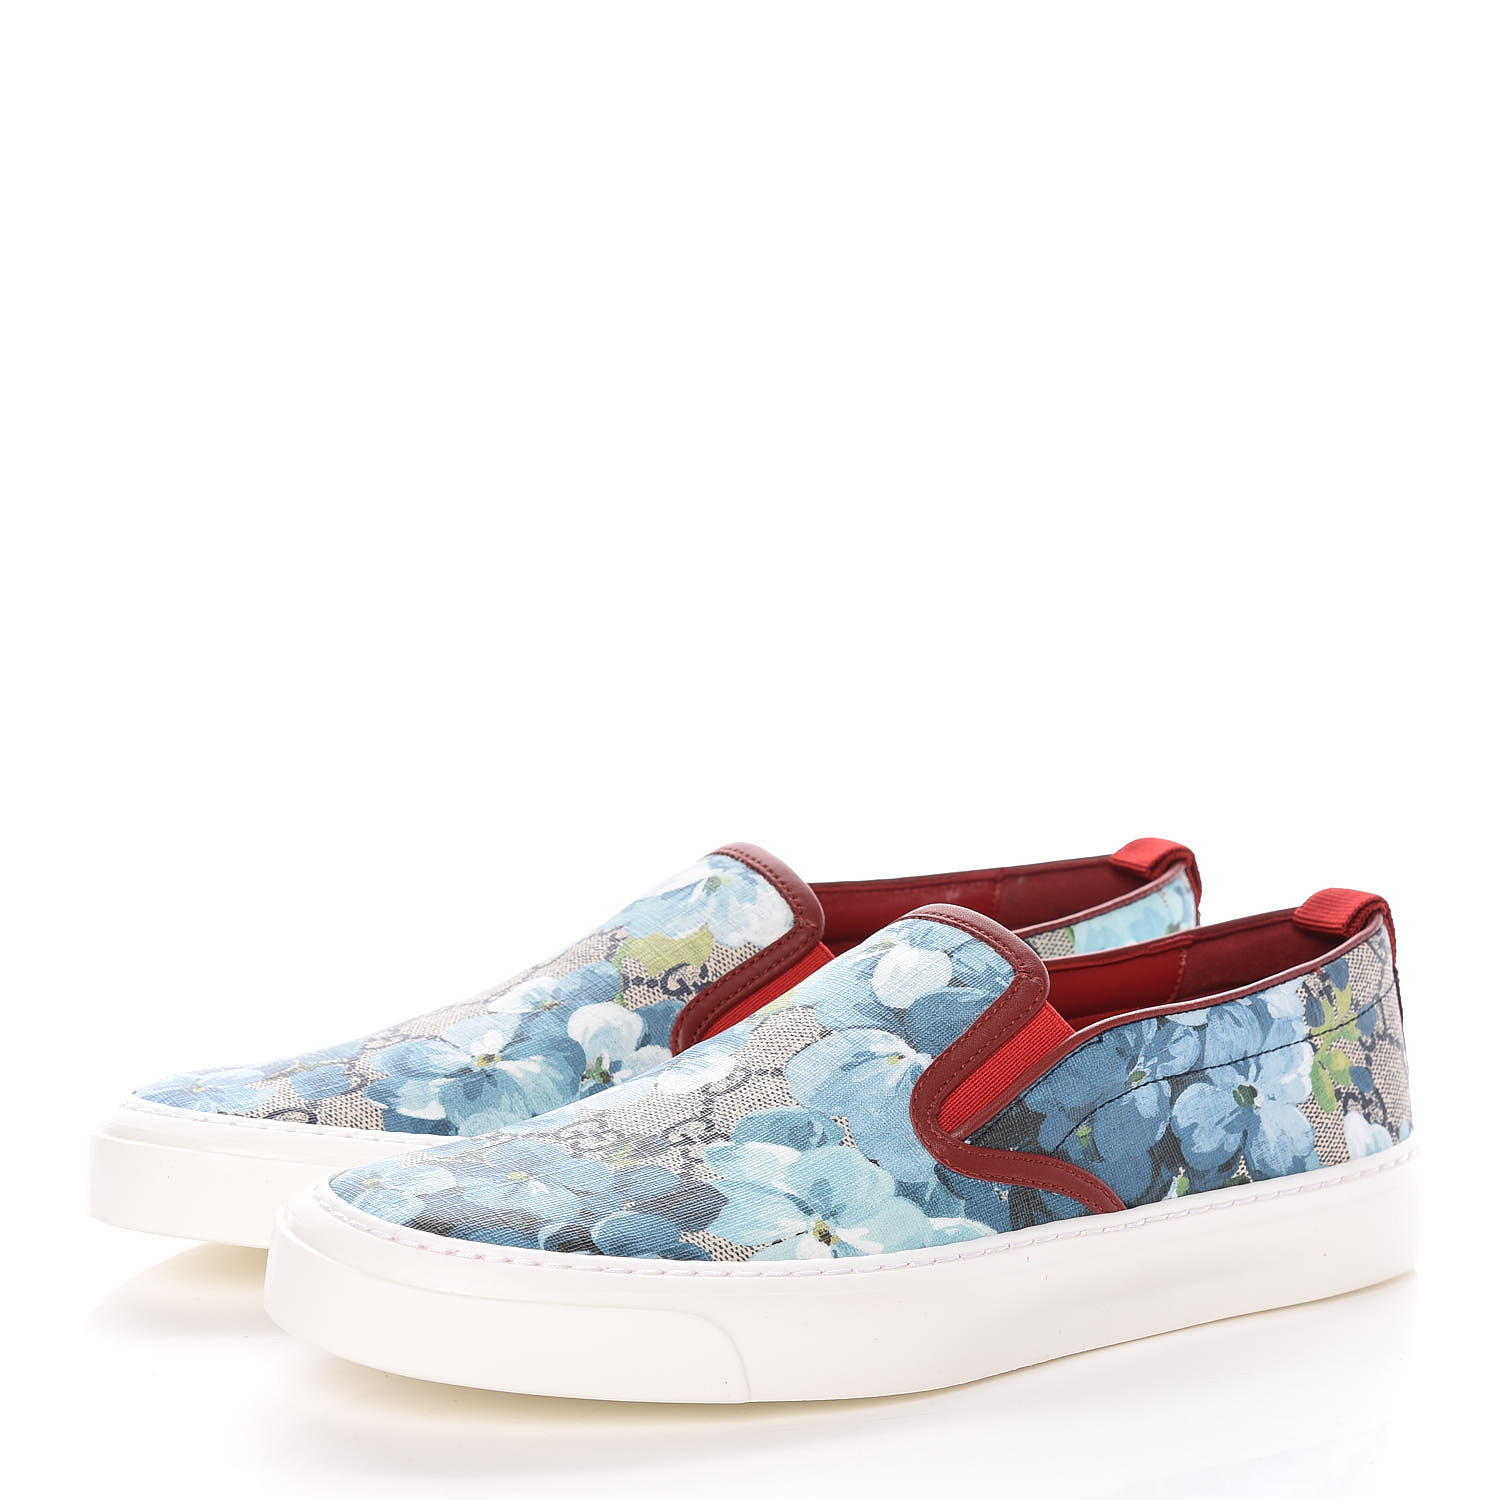 GUCCI GG Supreme Monogram Blooms Womens Slip On Sneakers 39 Blue 